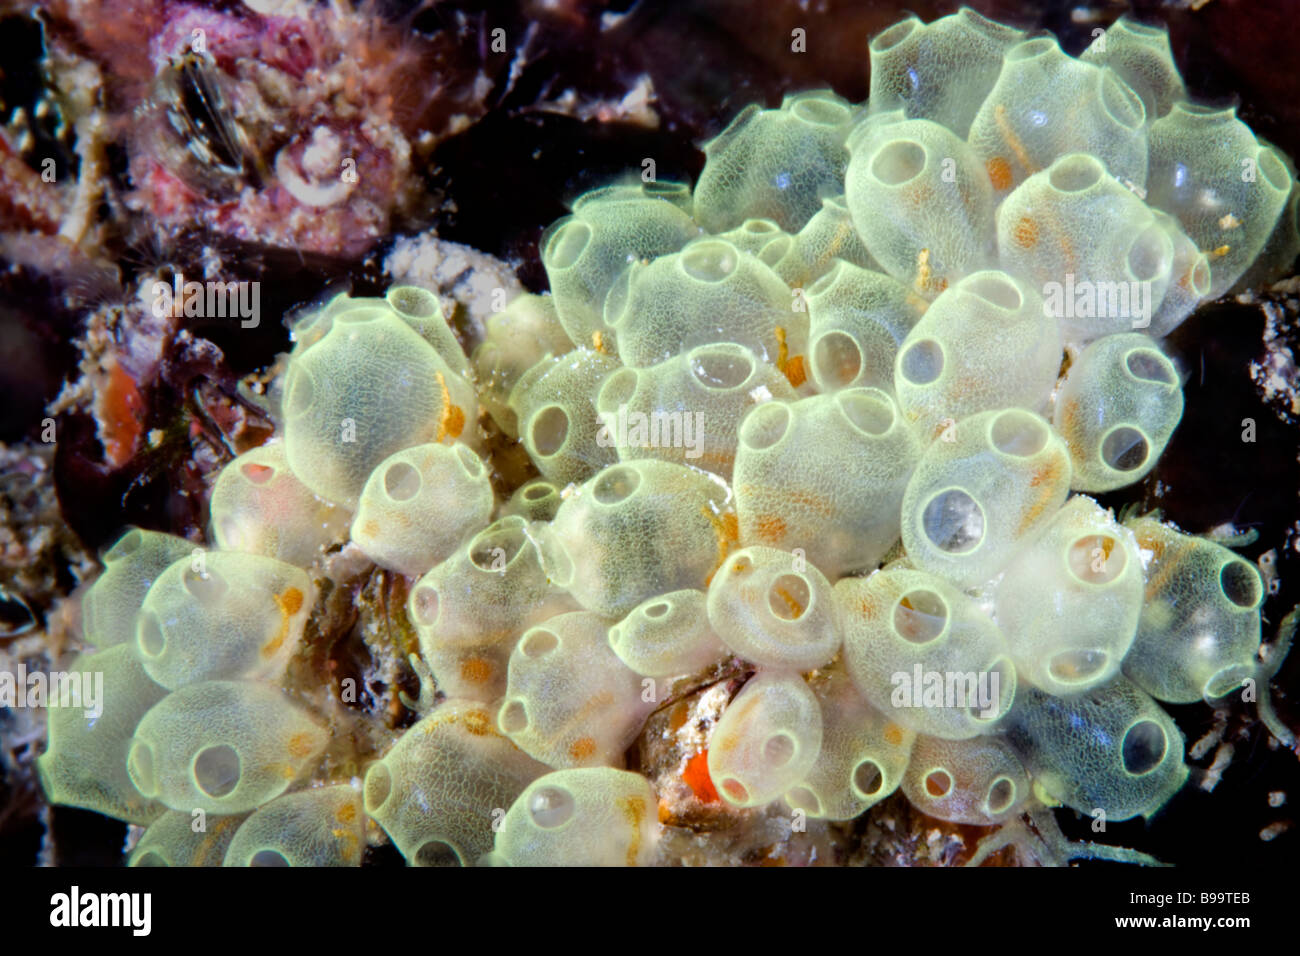 These Pycnoclavella Sea Squirts filter the water of the Celebes Sea at Barracuda Point reef near Sipadan Island in Malaysia. Stock Photo